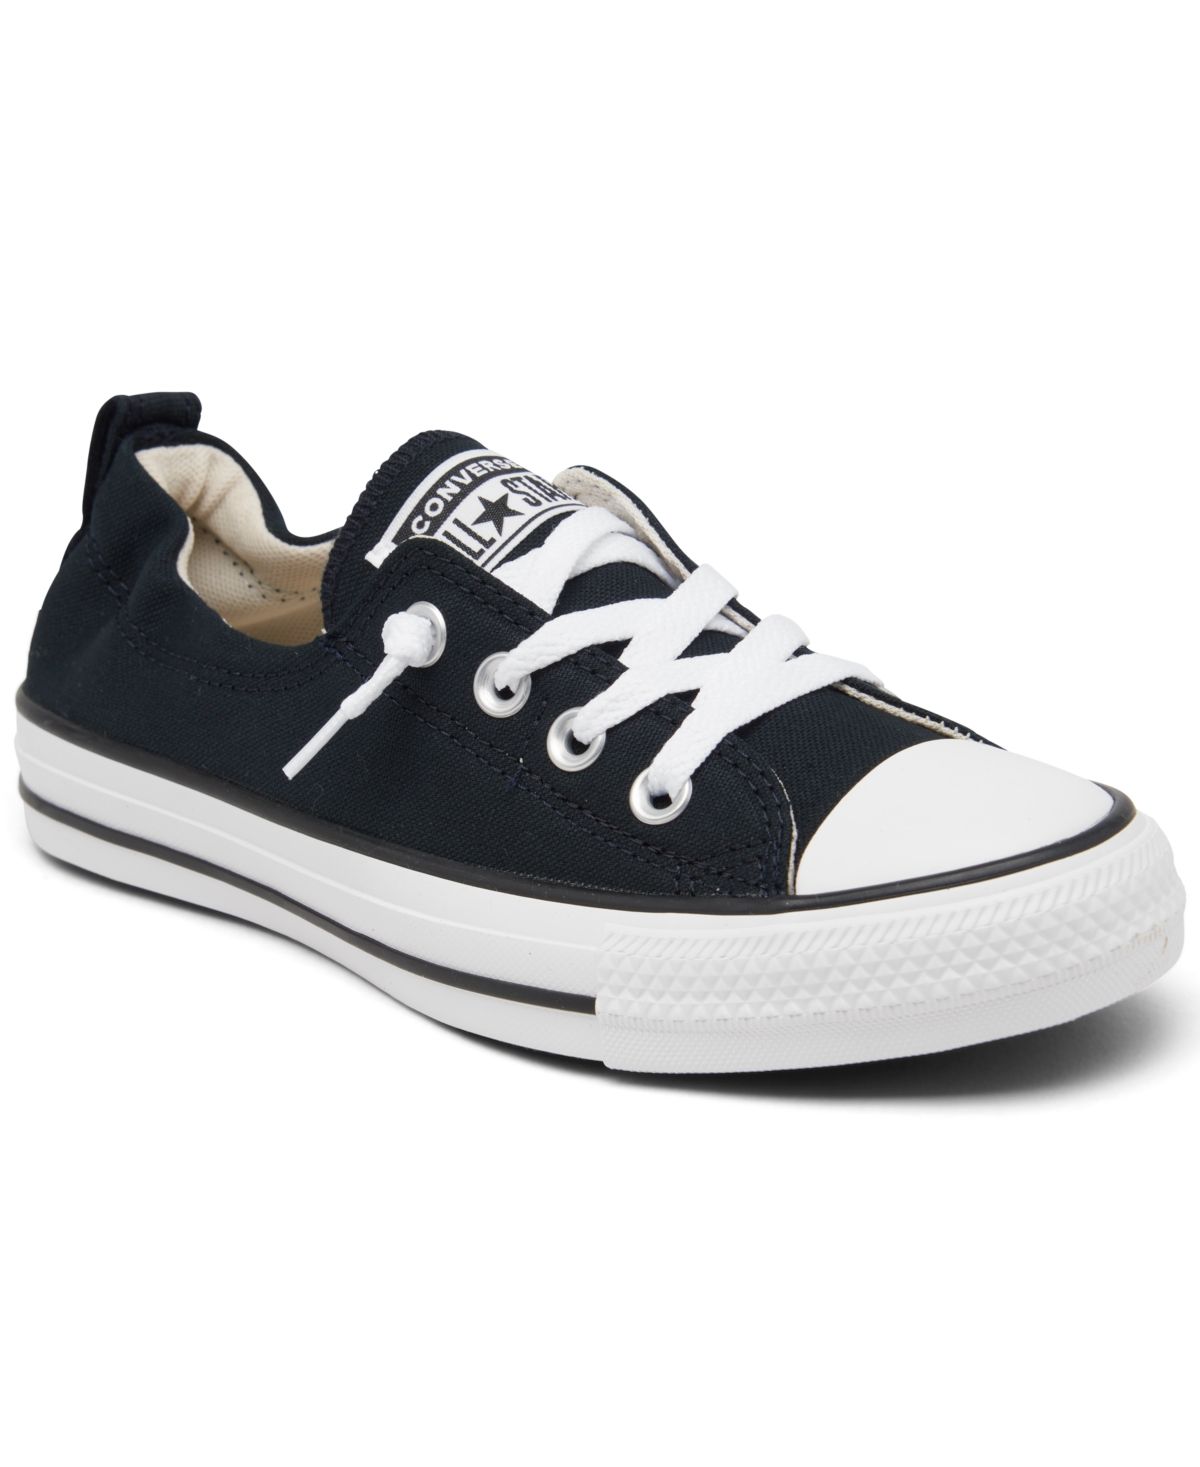 Converse Women's Chuck Taylor Shoreline Casual Sneakers from Finish Line | Macys (US)